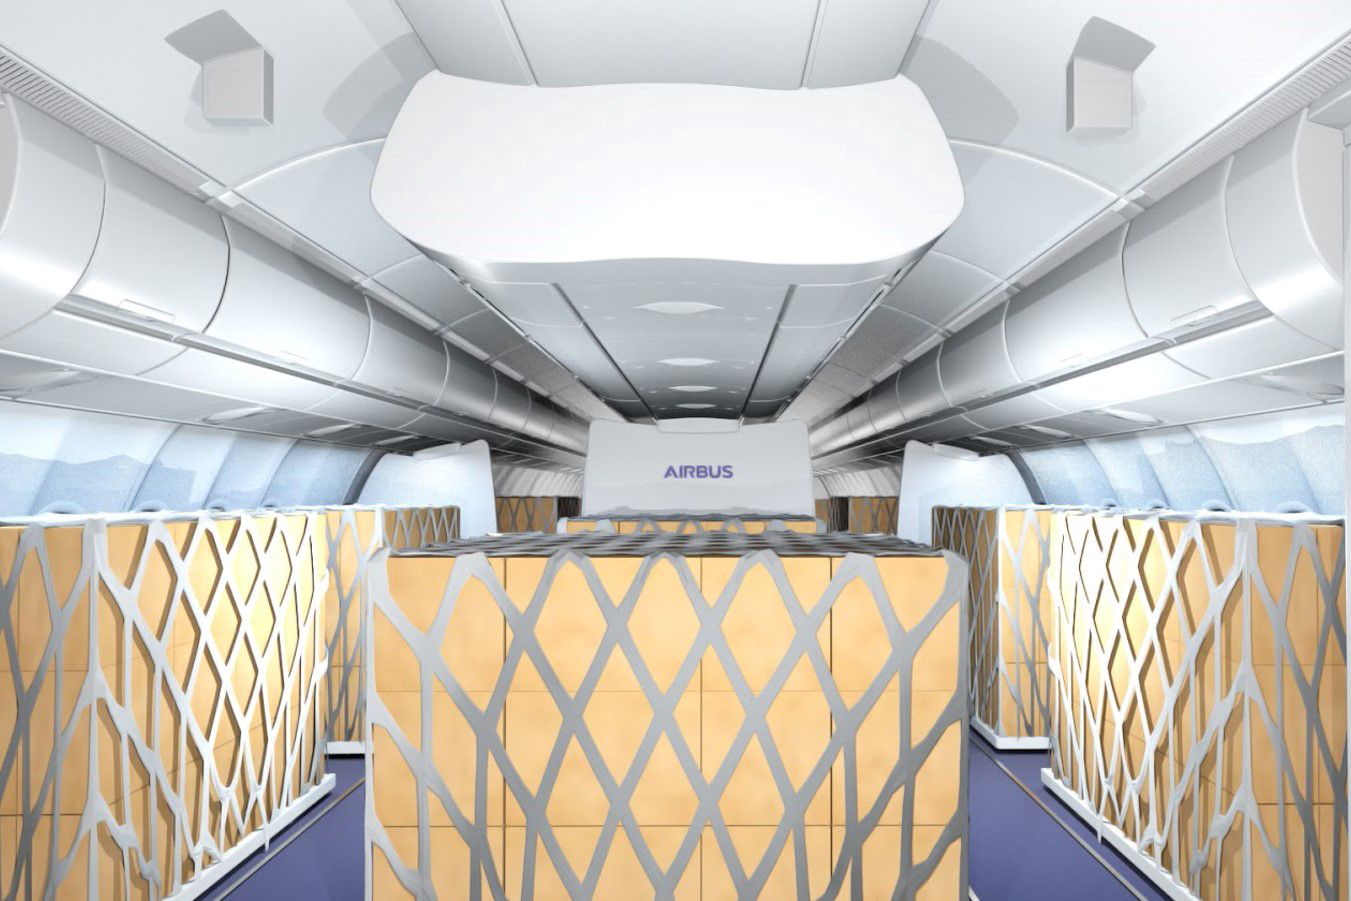 Lufthansa Technik (LHT) has signed a cooperation agreement with Airbus to co-develop temporary “Cargo in the Cabin” solutions for A330 aircraft. This new Supplemental Type Certificate (STC) solution will enable operators to load cargo into the cabins of their A330-200 and A330-300 aircraft. Click to enlarge.